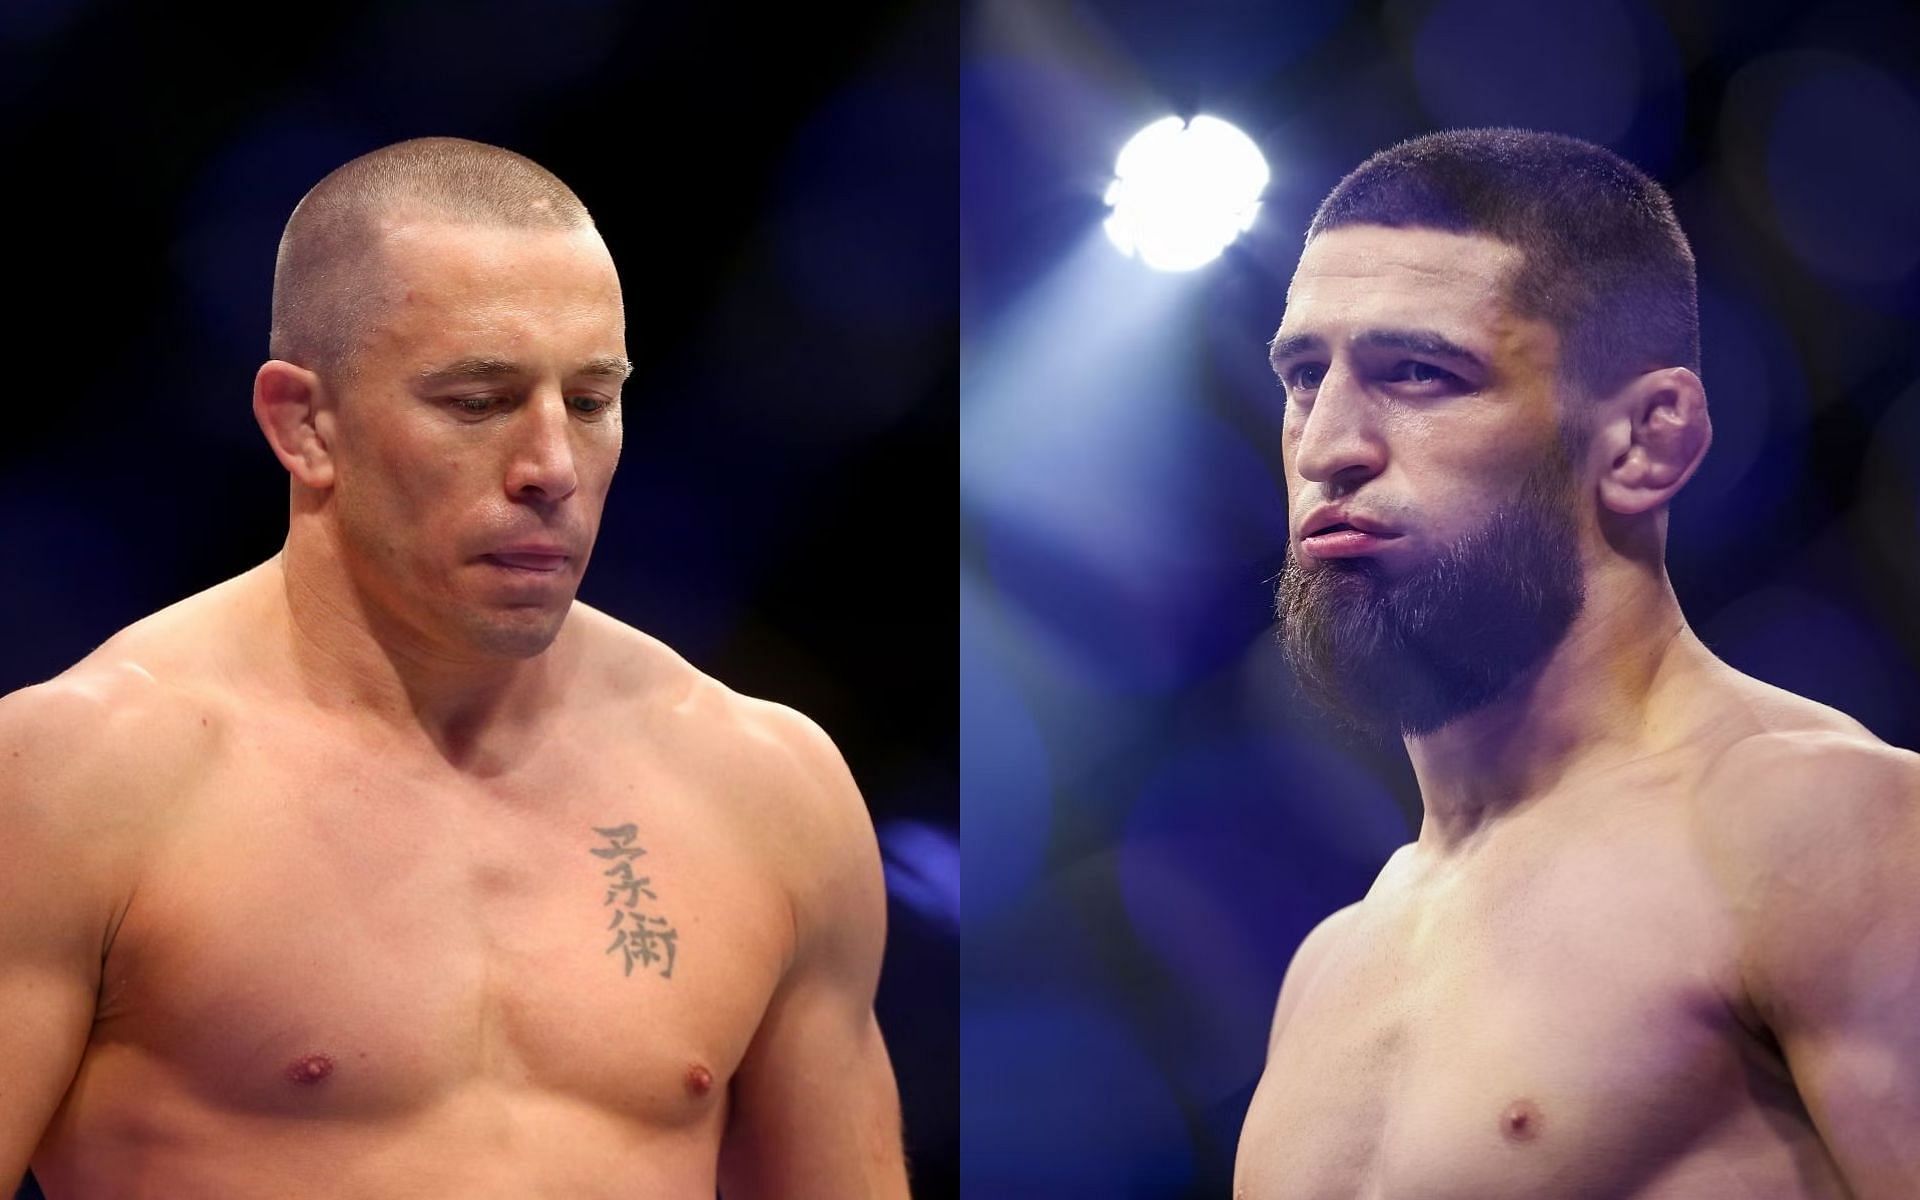 Georges St-Pierre (left) and Khamzat Chimaev (right)